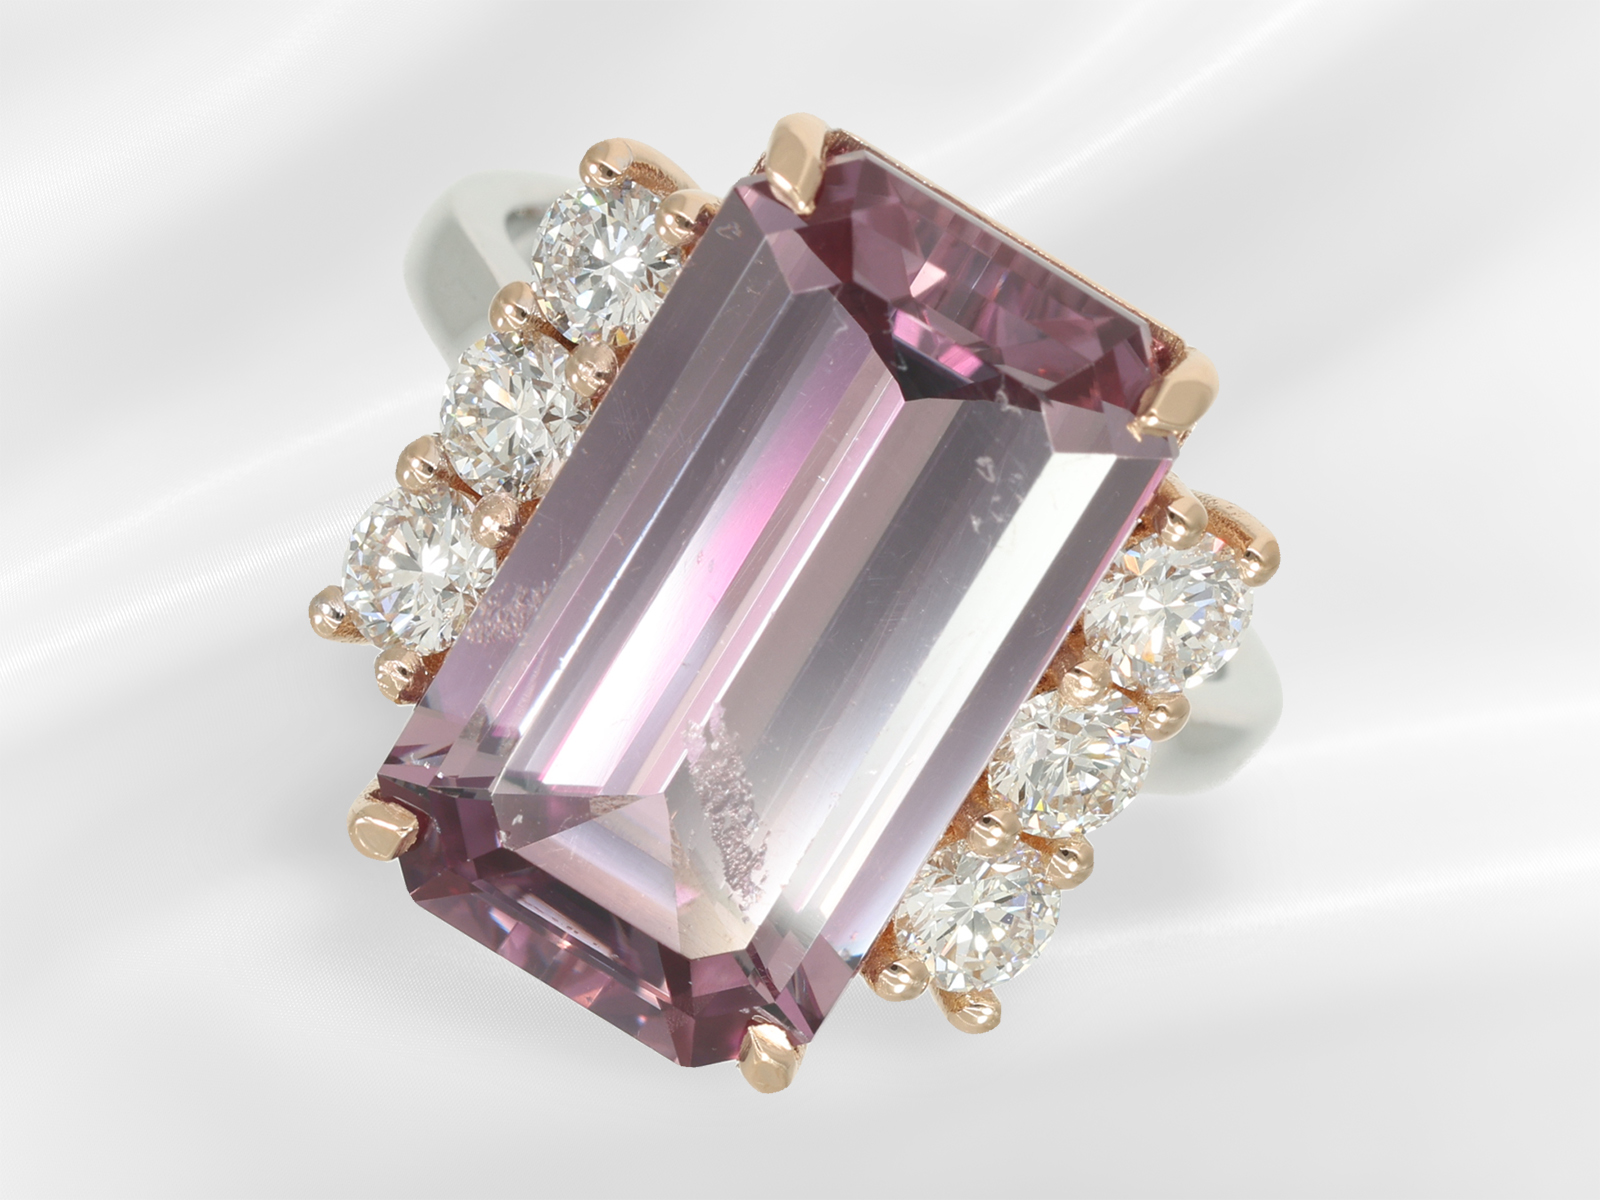 Ring: gold ring with pink diaspore "sultanite" with colour change and fine brilliant-cut diamonds, a